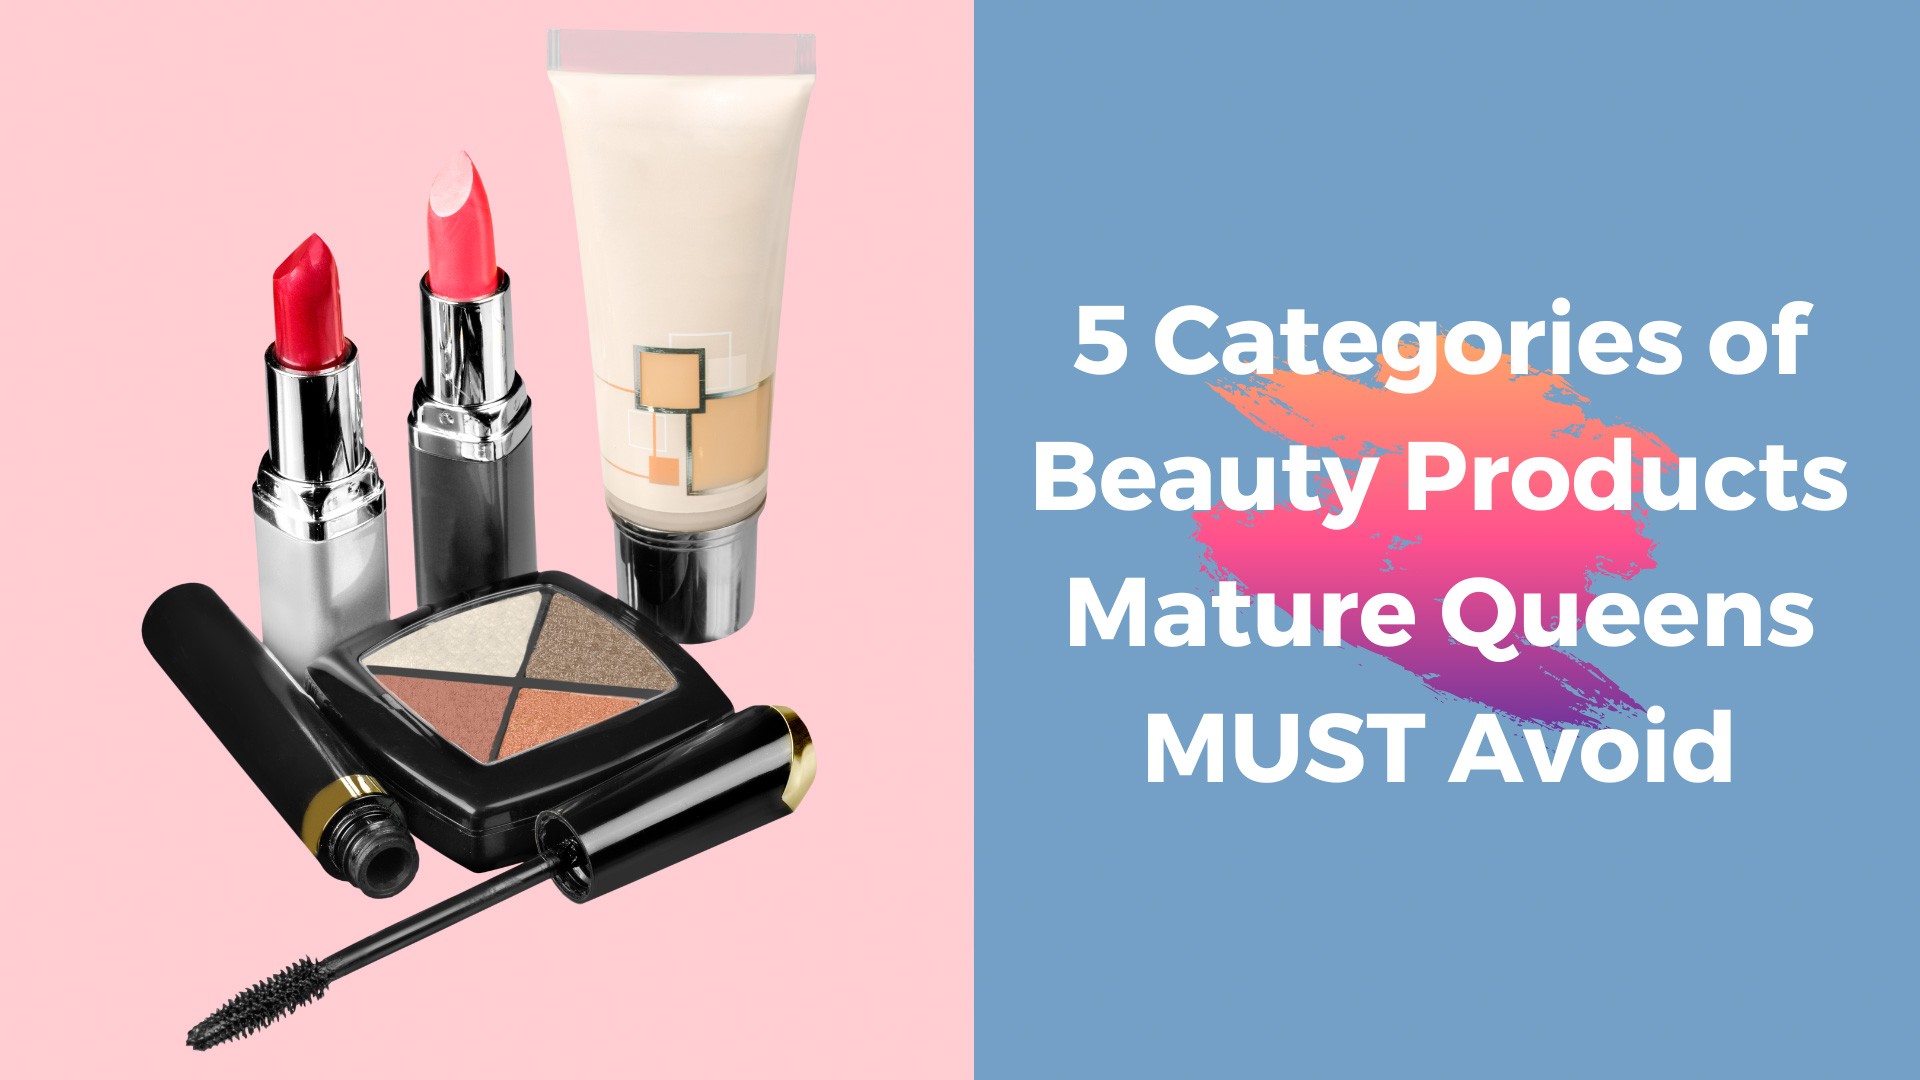 Beauty Products Mature Queens MUST Avoid